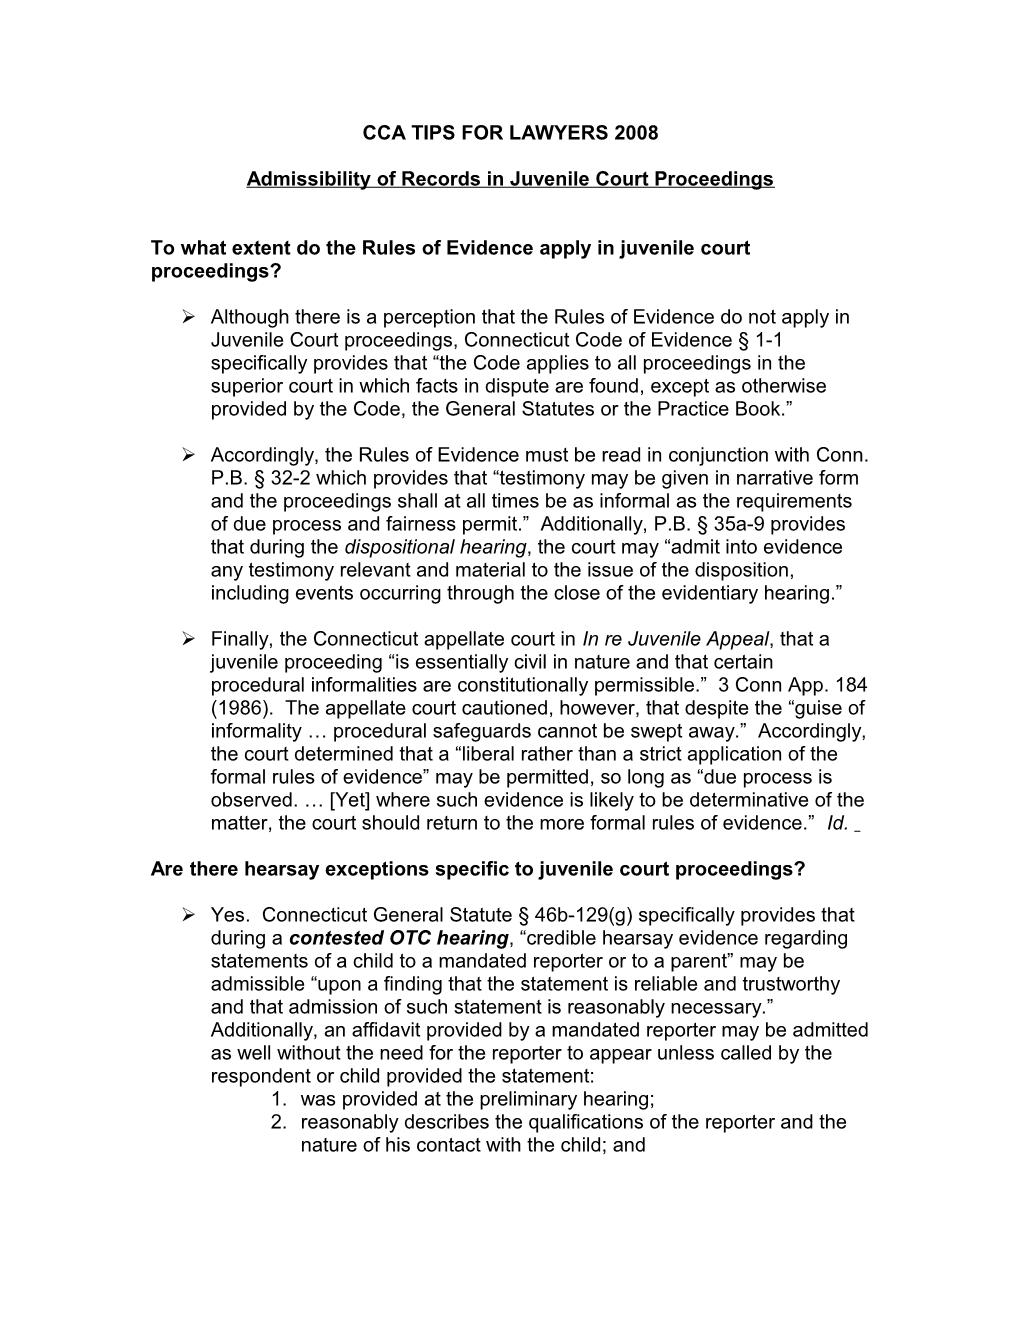 Admissibility of Records in Juvenile Court Proceedings